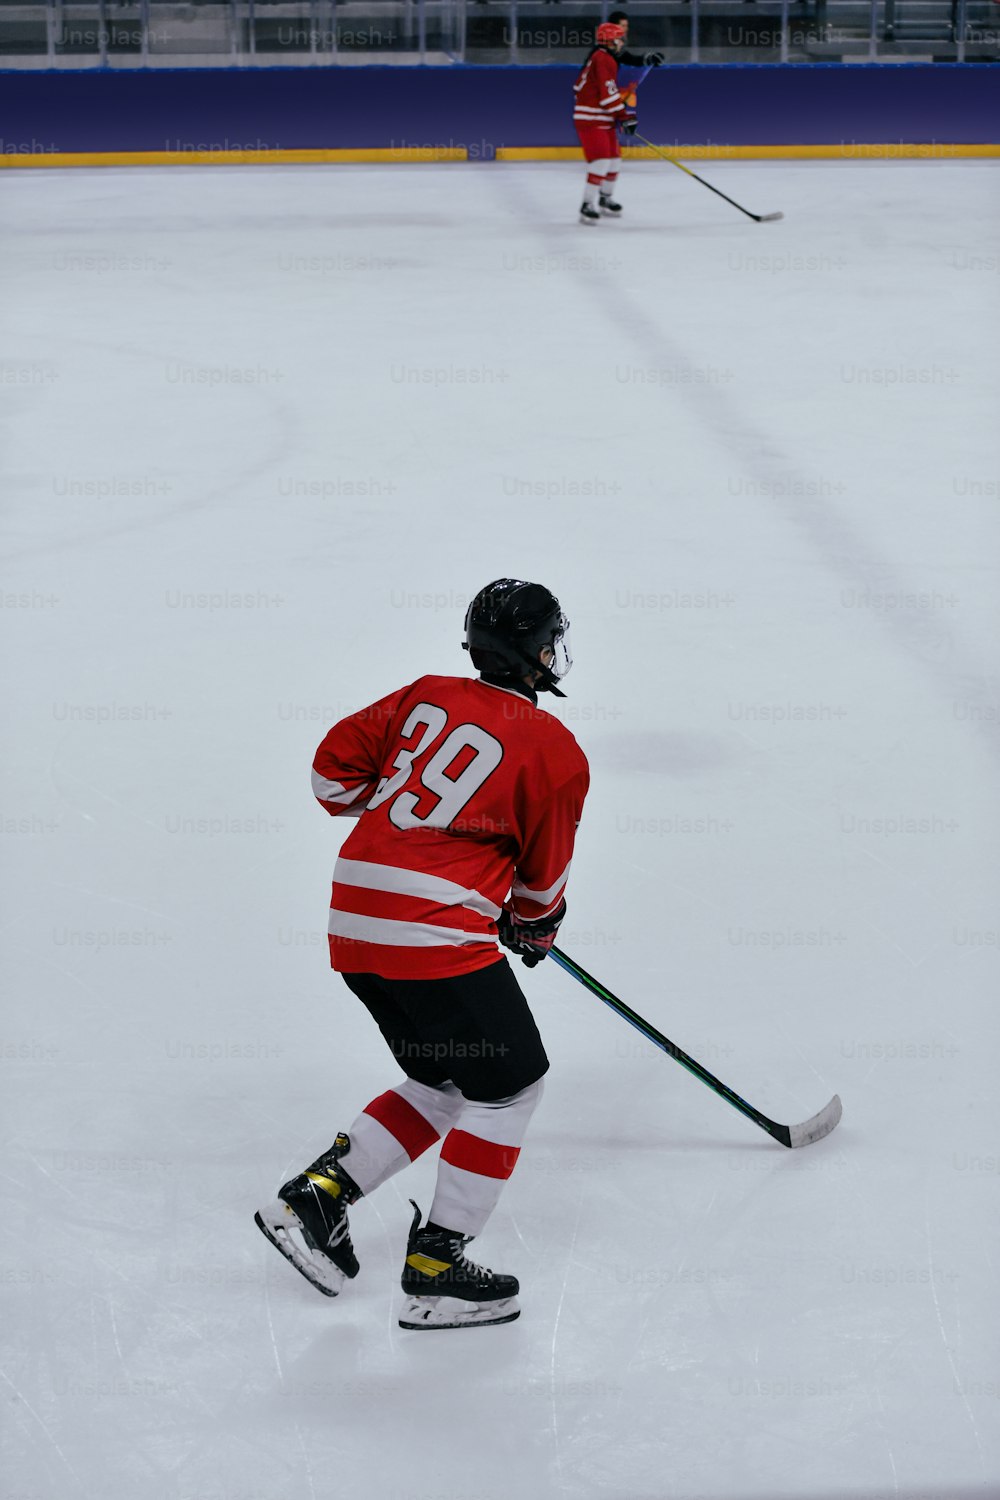 a hockey player in a red jersey skating on the ice